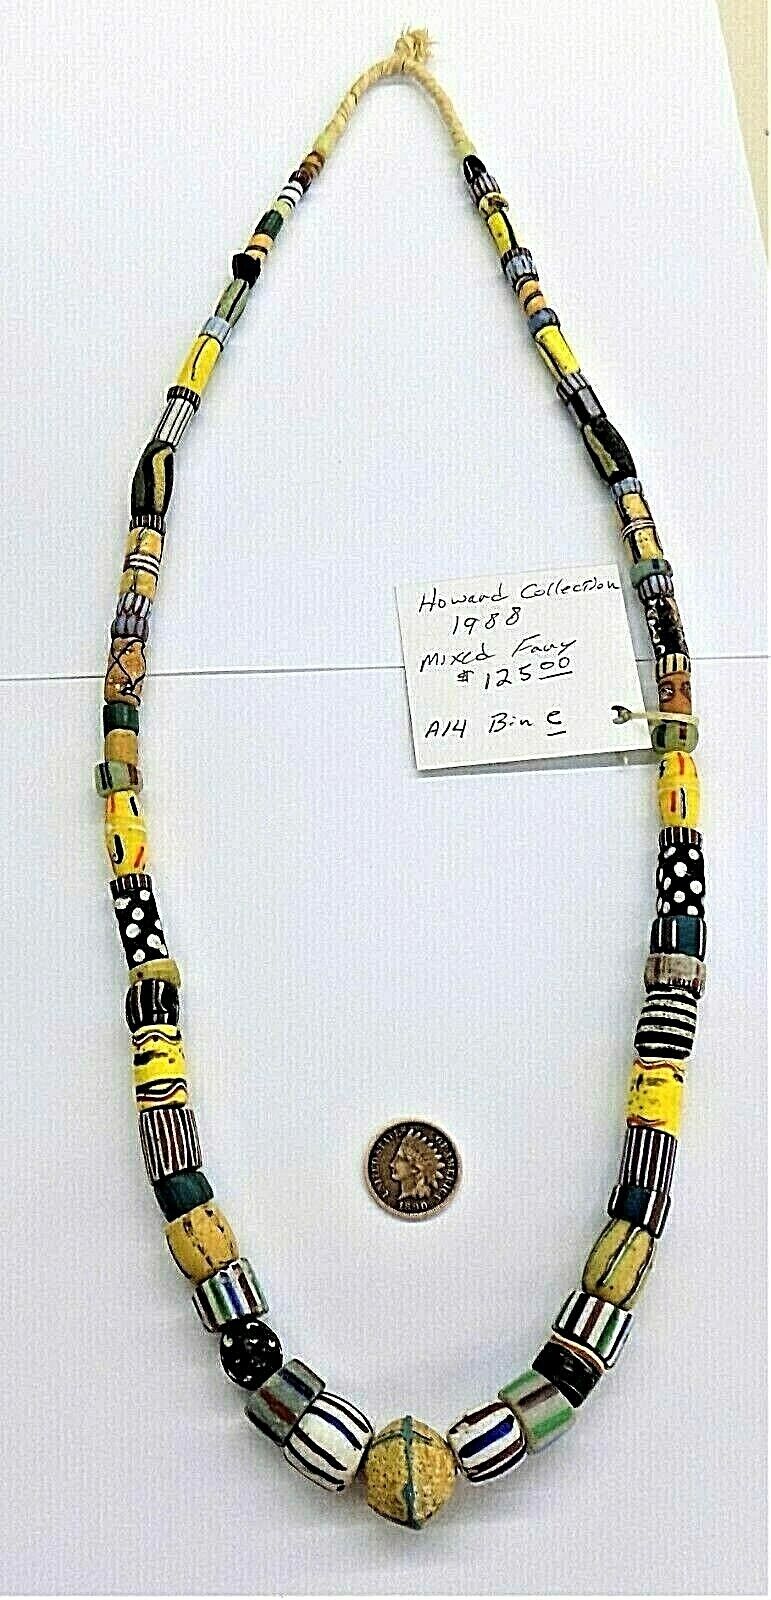 Long Strand Fancy Mixed  African Trade Beads  Howard Collection A14 BNe 1988